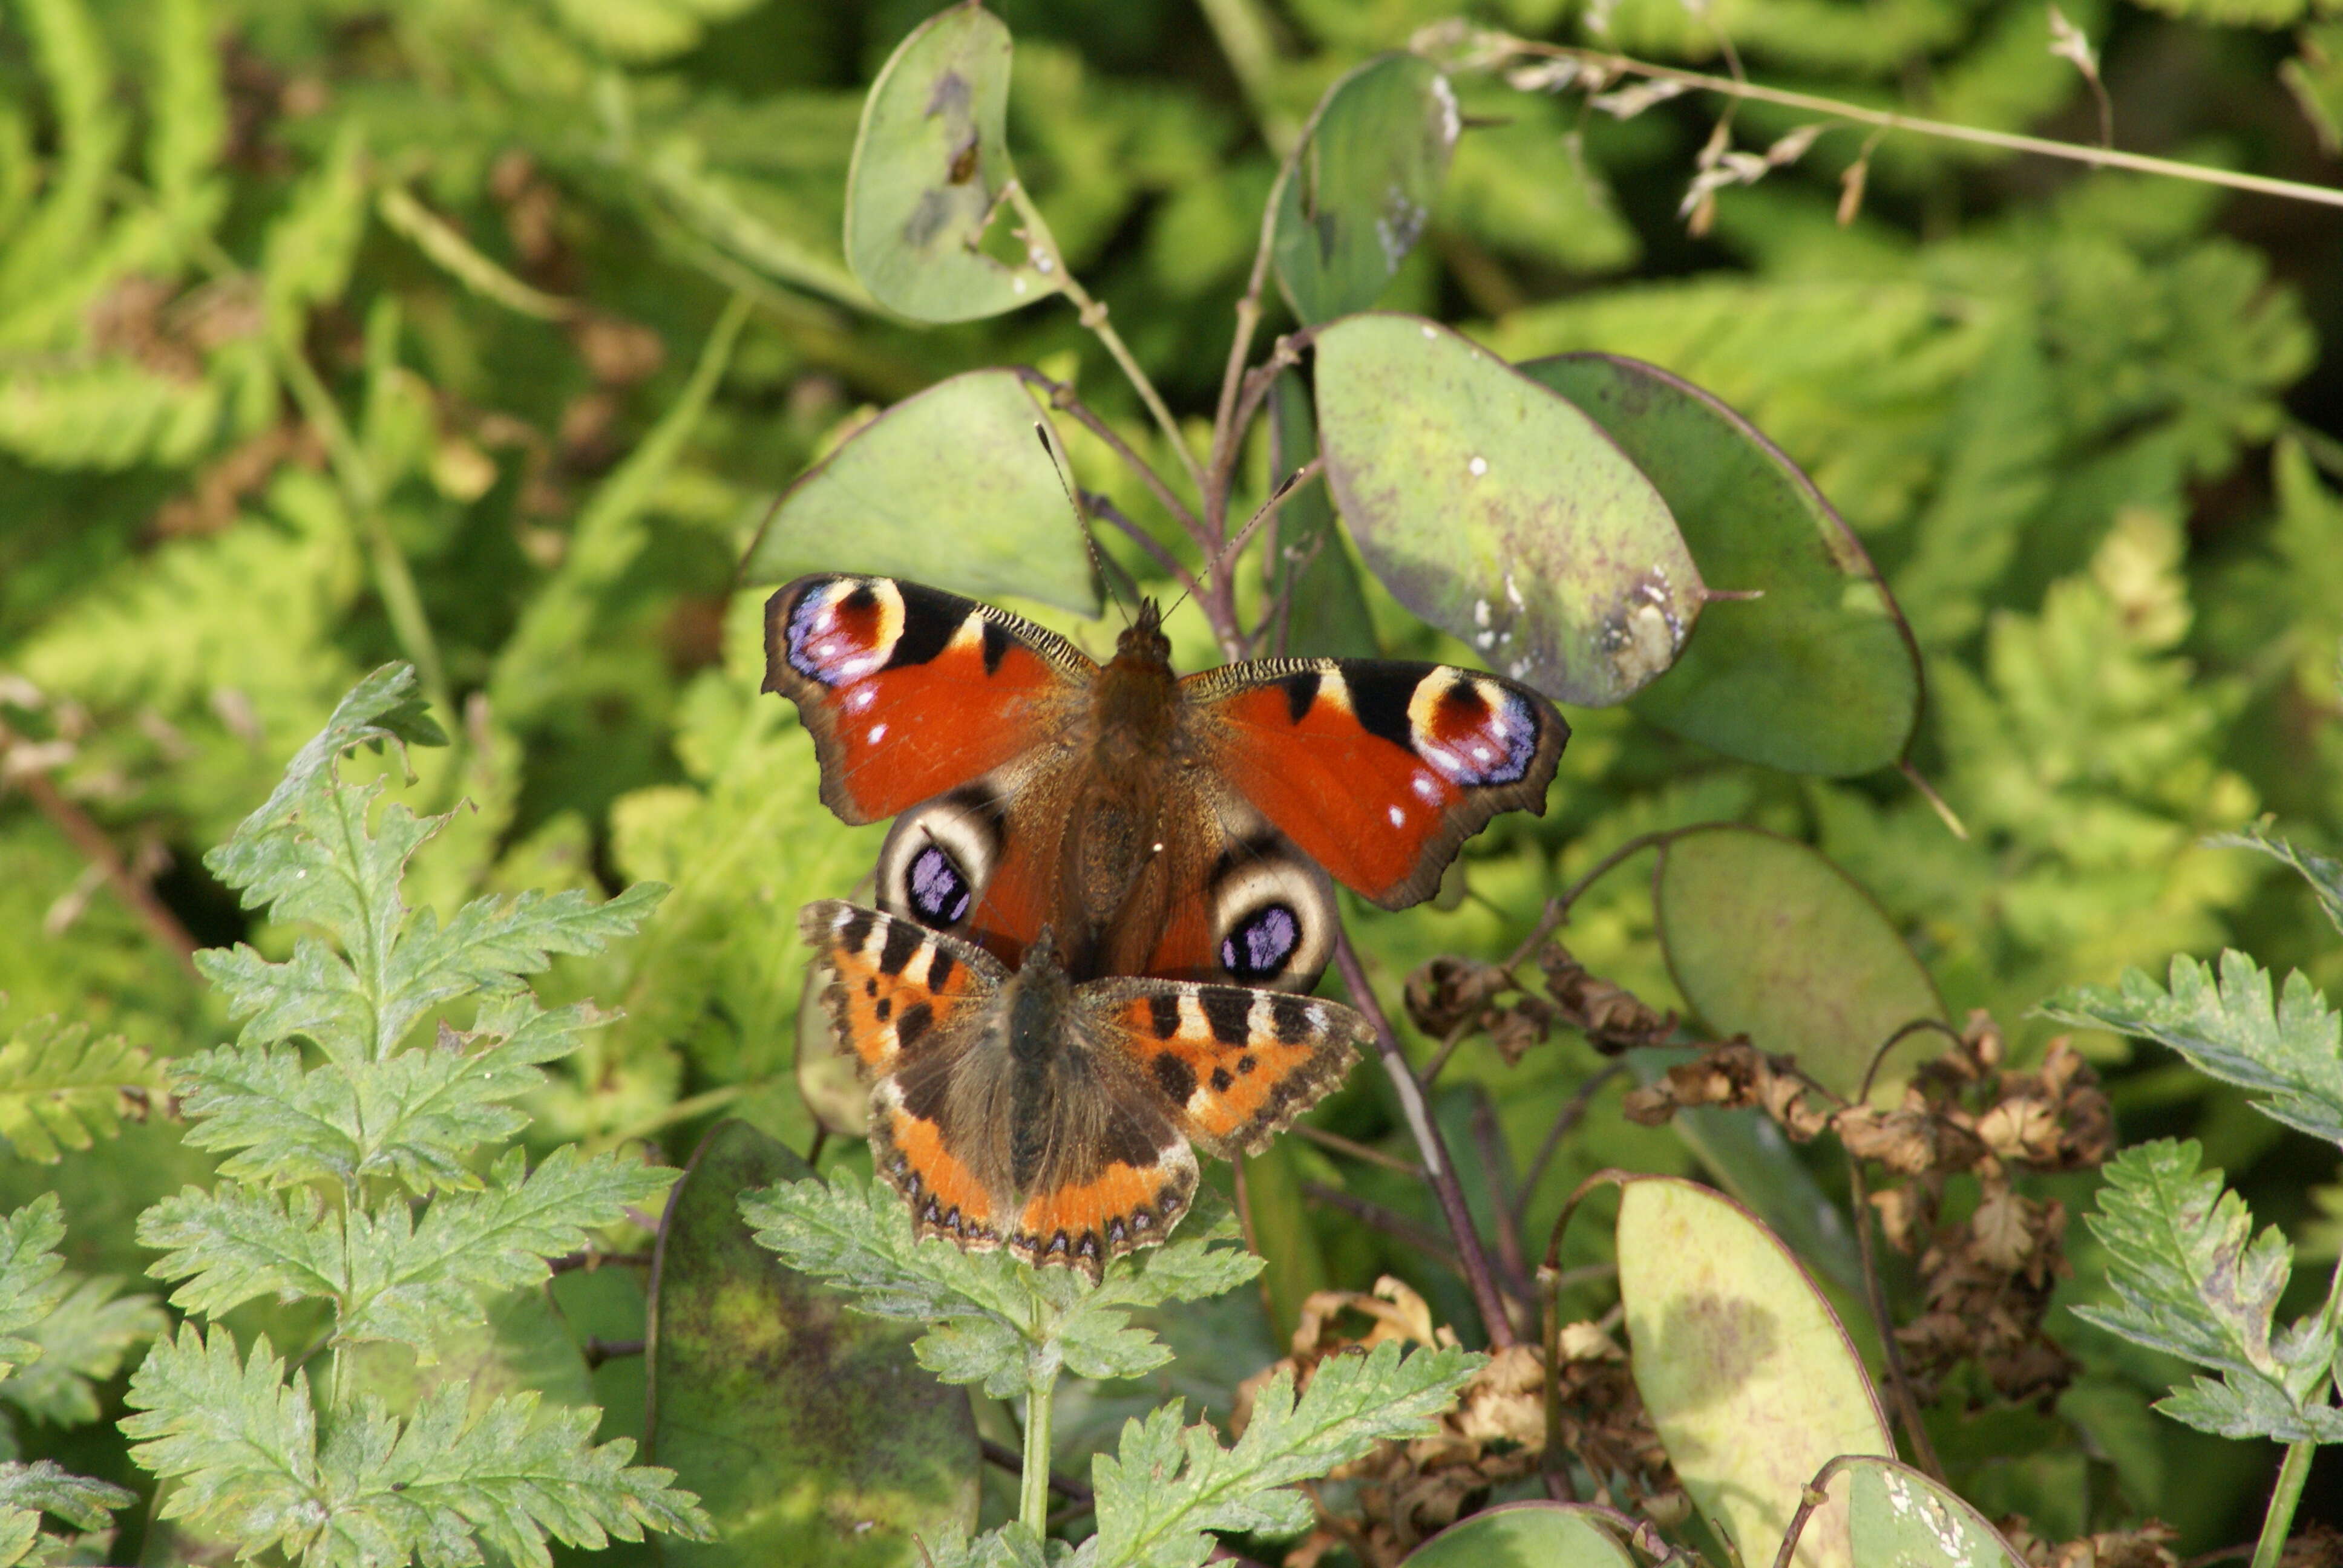 2013 was the best year ever for the Peacock, despite the efforts of this Small Tortoiseshell to disrupt proceedings!